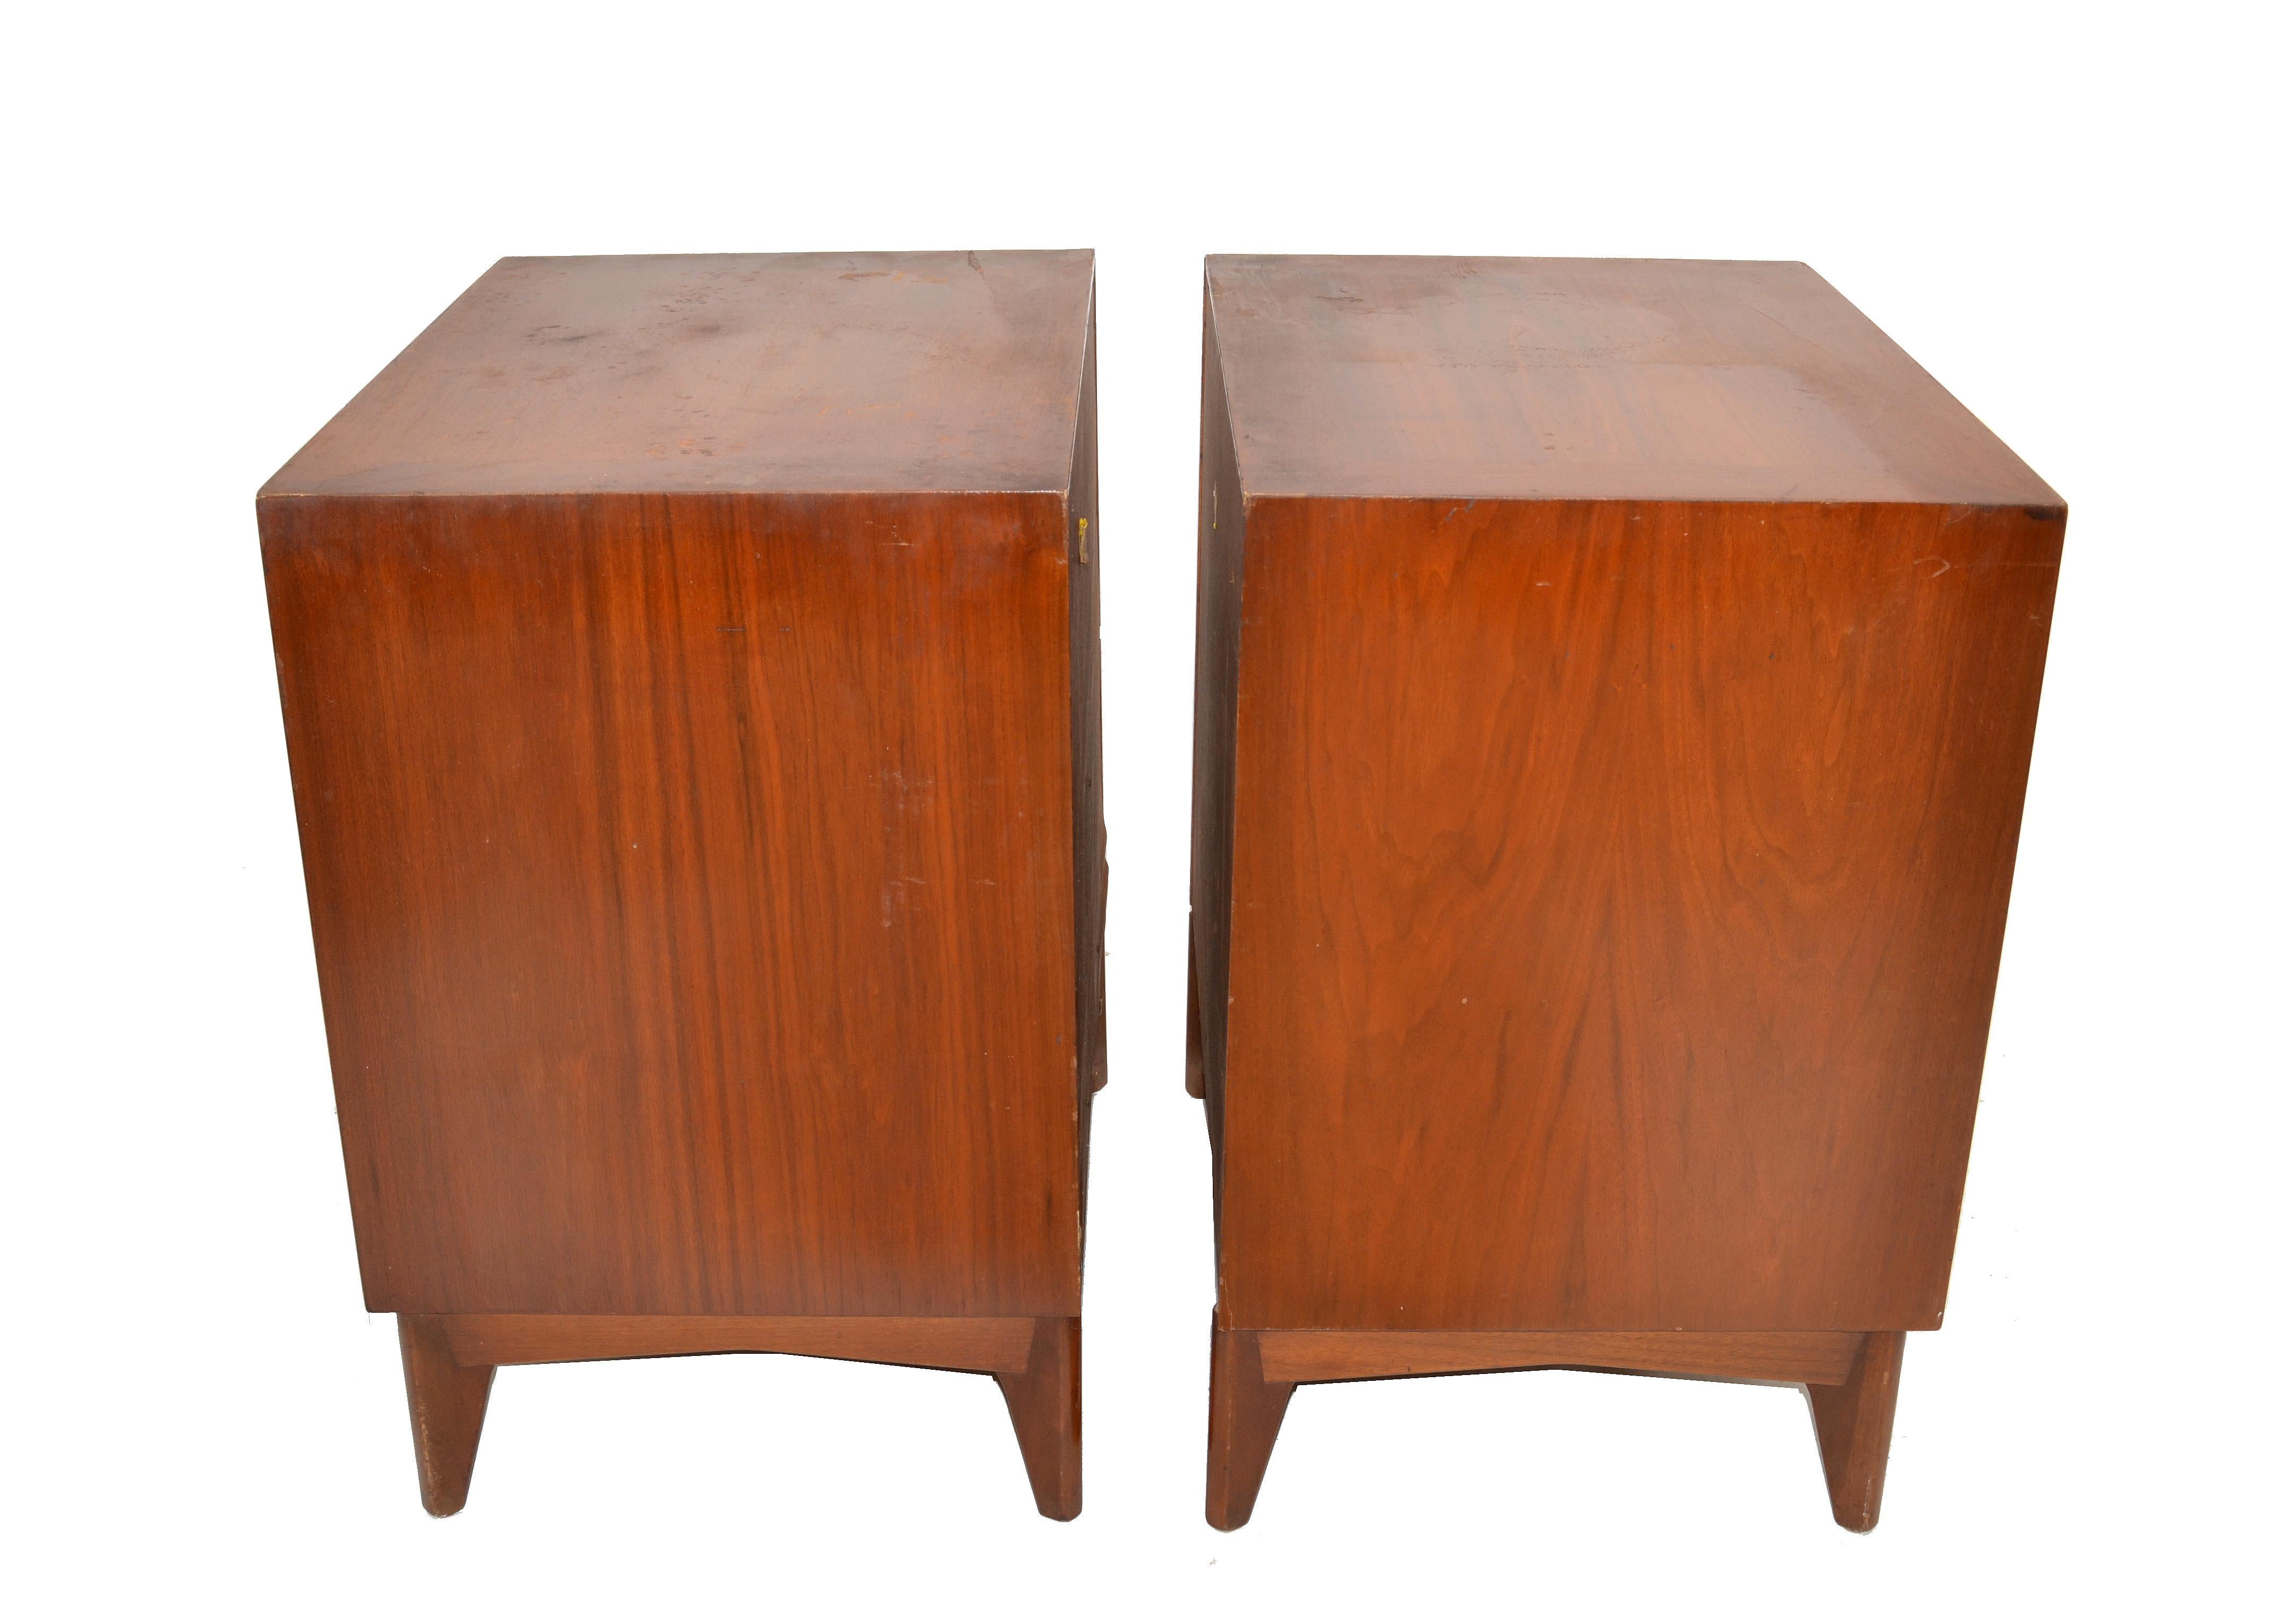 American Classic Wood Brass Night Stand Bedside Tables Mid-Century Modern - Pair In Good Condition For Sale In Miami, FL